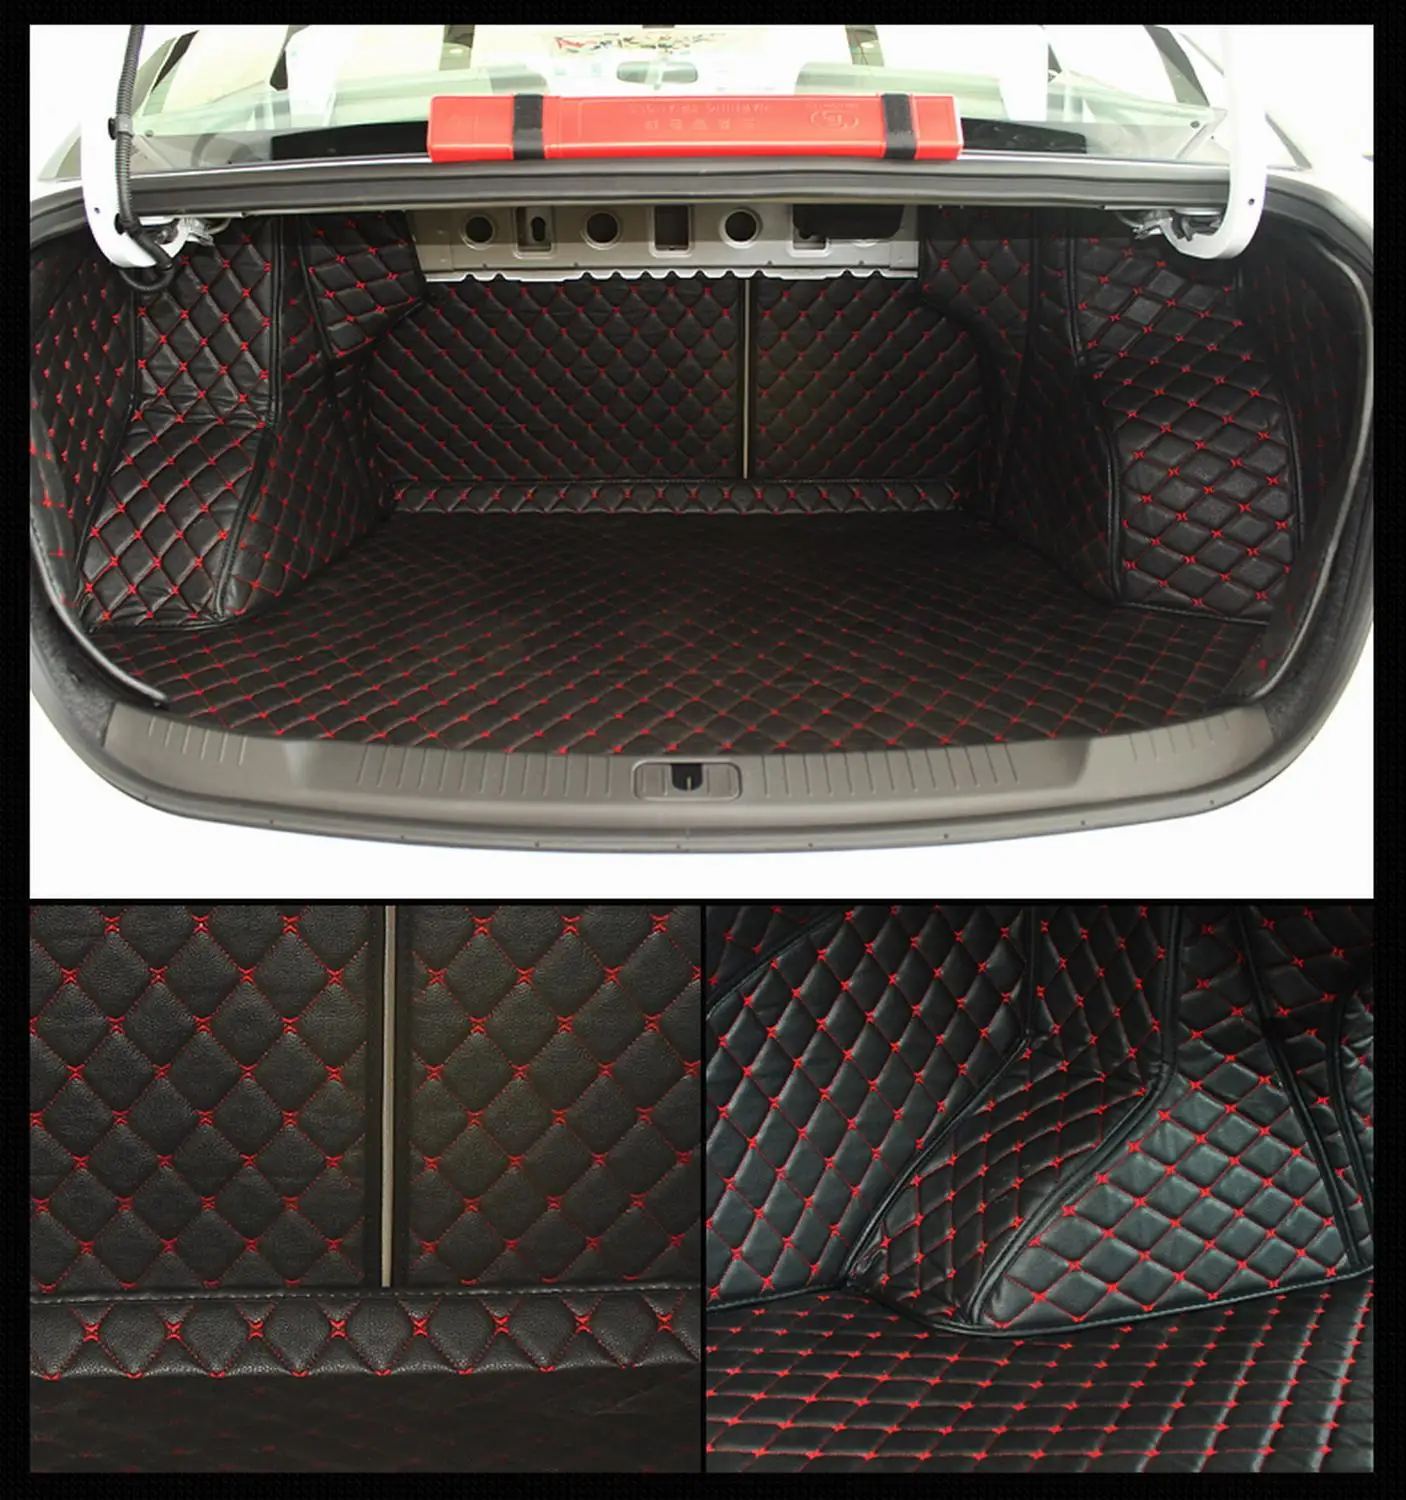 

No Odor Wholy Surrounded Waterproof Non Slip Car Trunk Mats Durable Carpets for Buick Lacrosse/Regal/Excelle